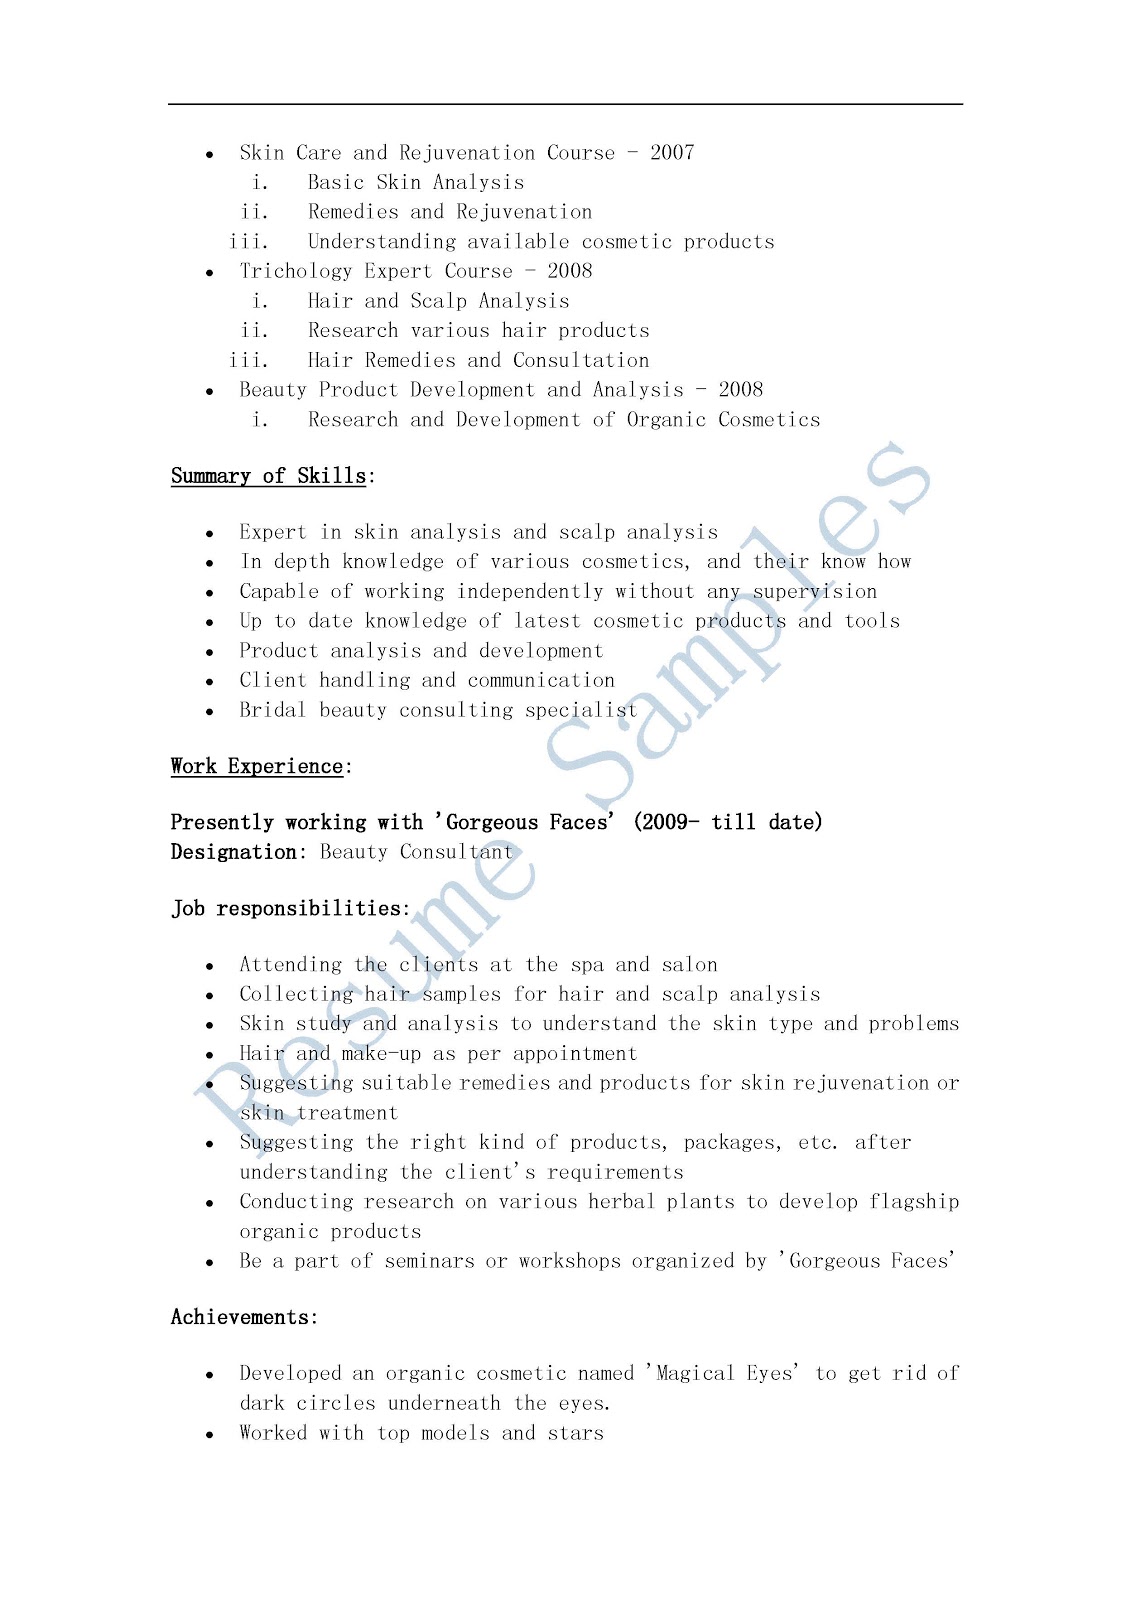 resume samples  beauty consultant resume